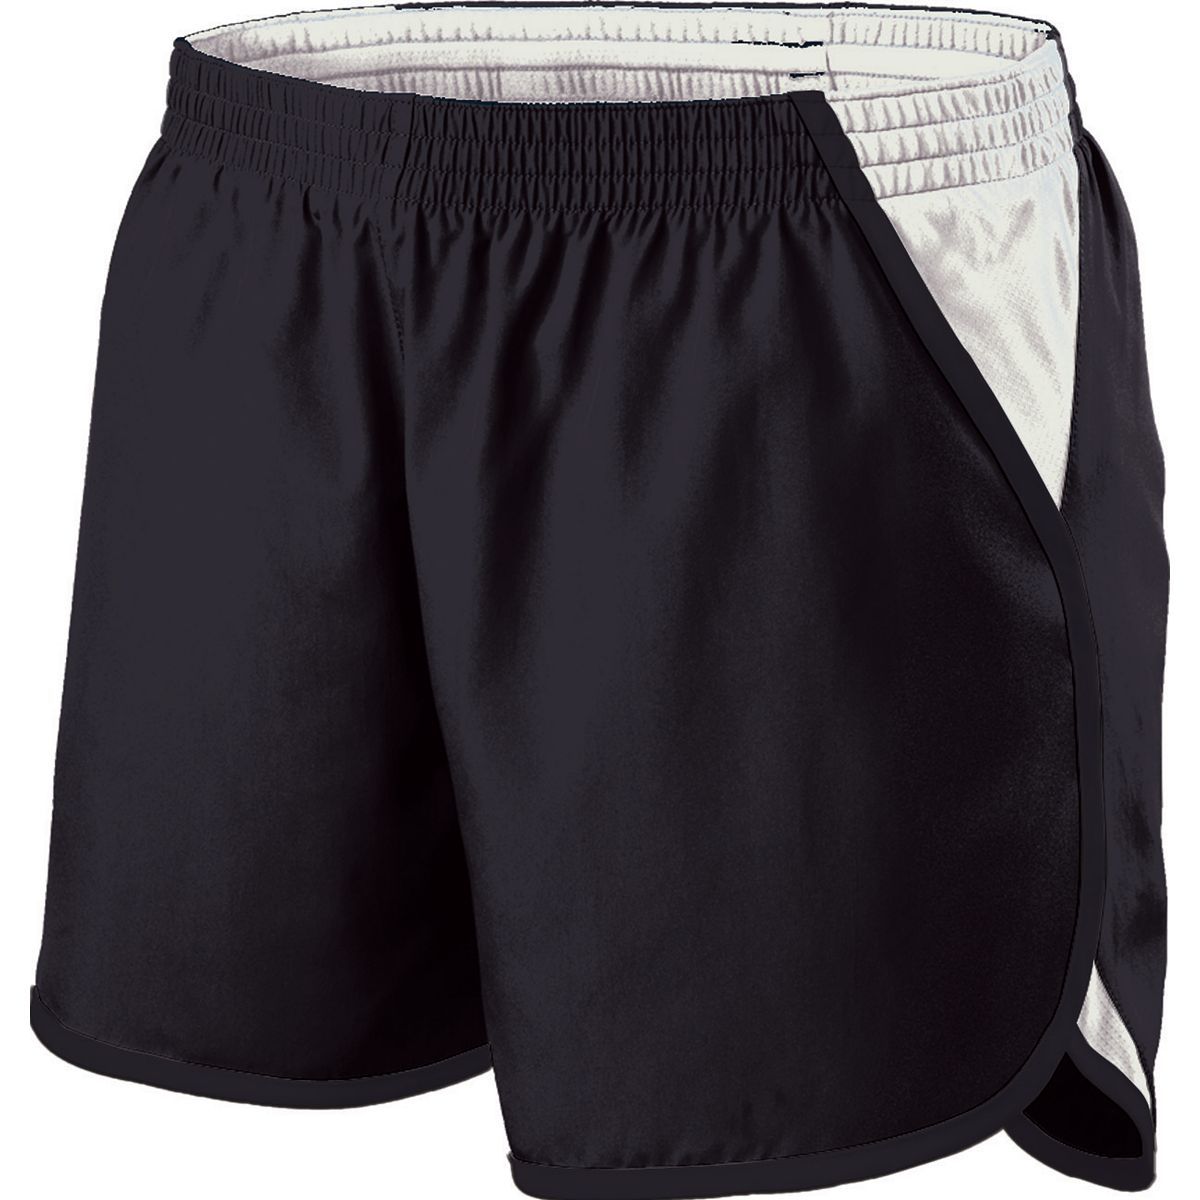 Holloway Girls Energize Shorts in Black/White/Black  -Part of the Girls, Holloway, Girls-Shorts product lines at KanaleyCreations.com